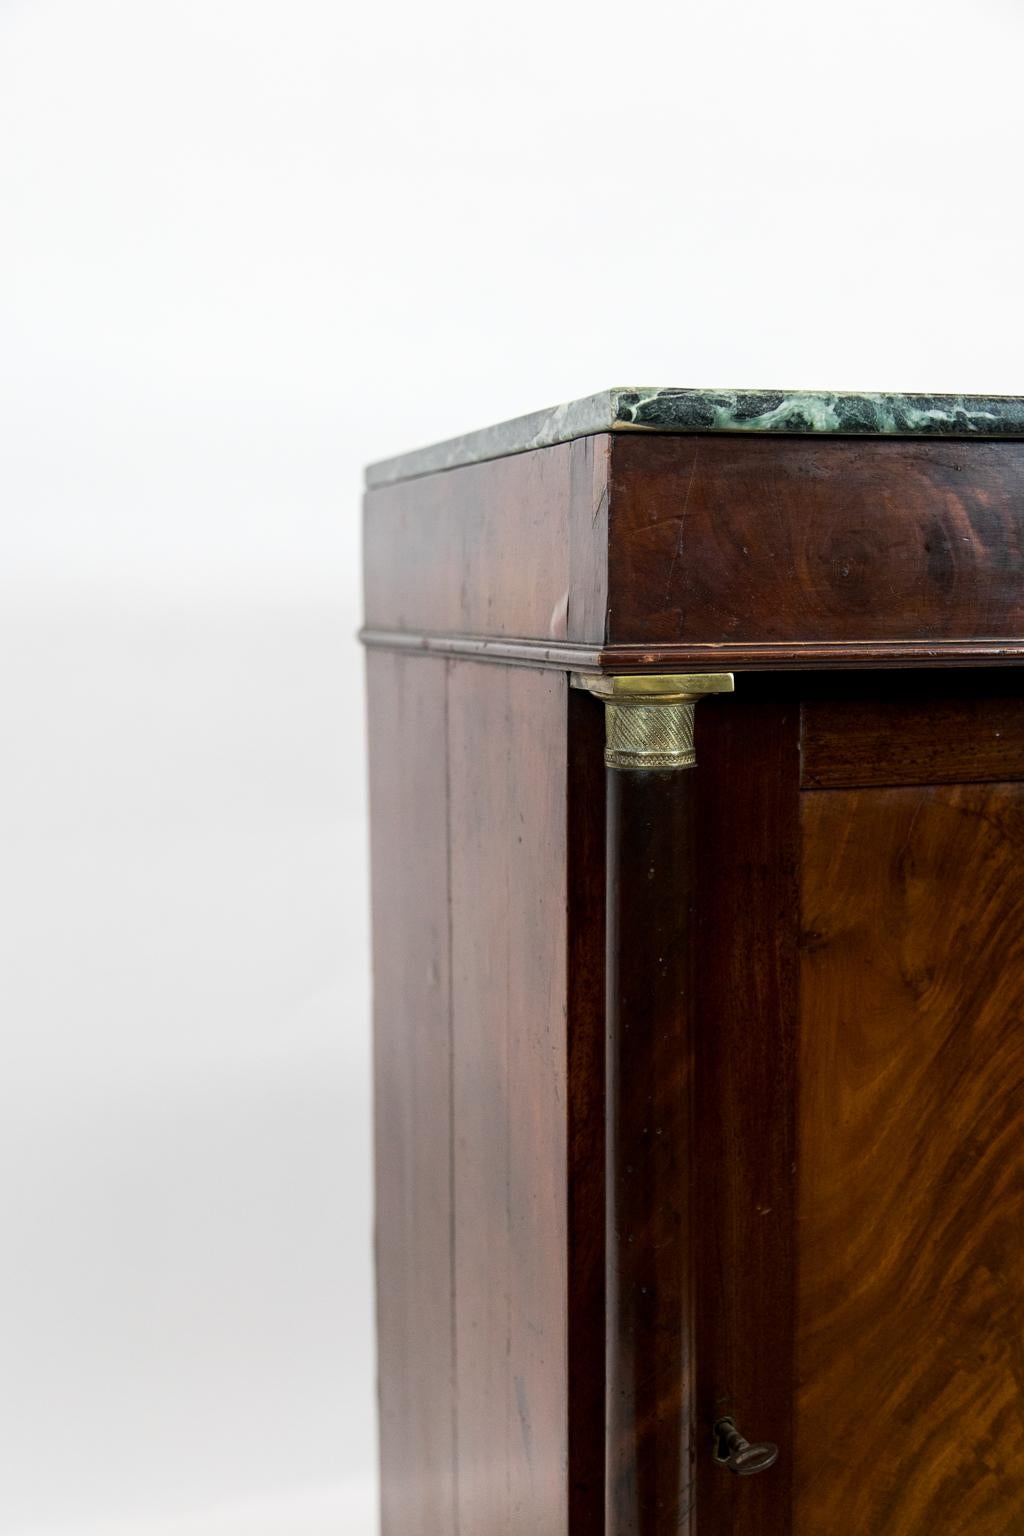 marble top console cabinet